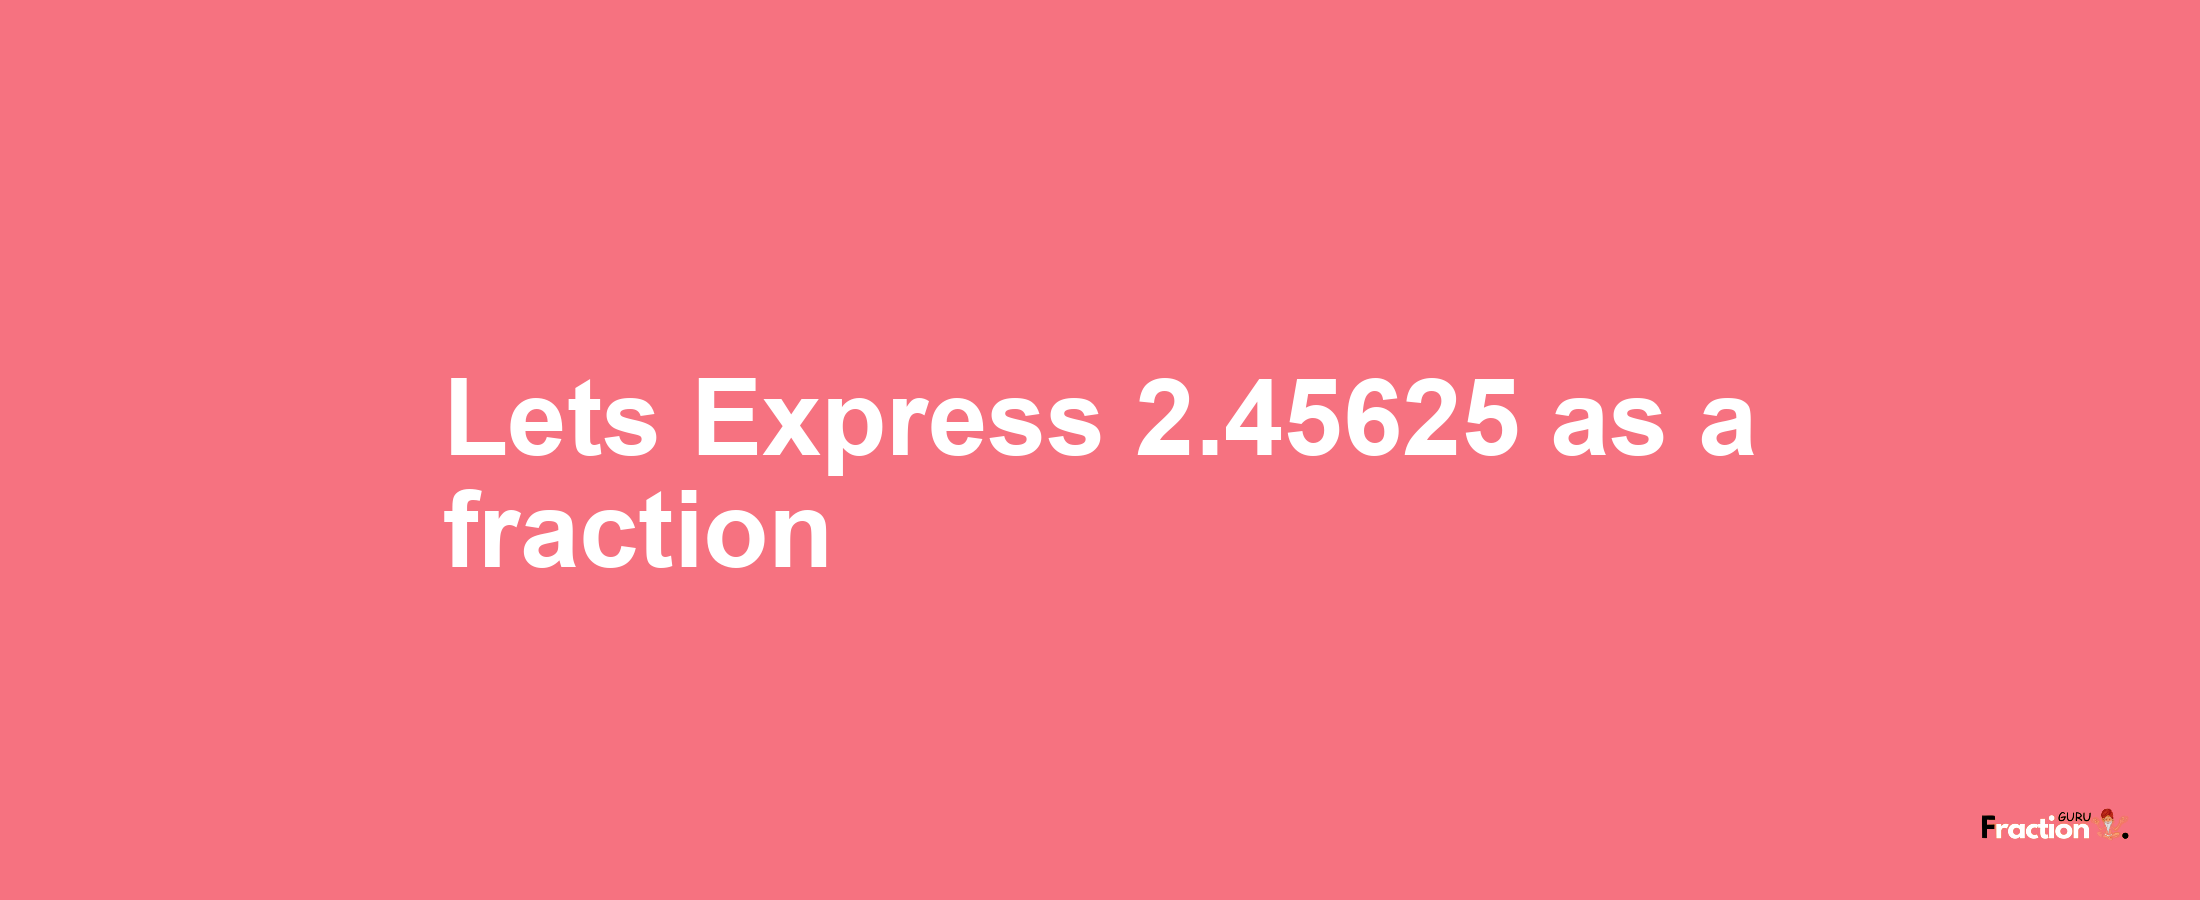 Lets Express 2.45625 as afraction